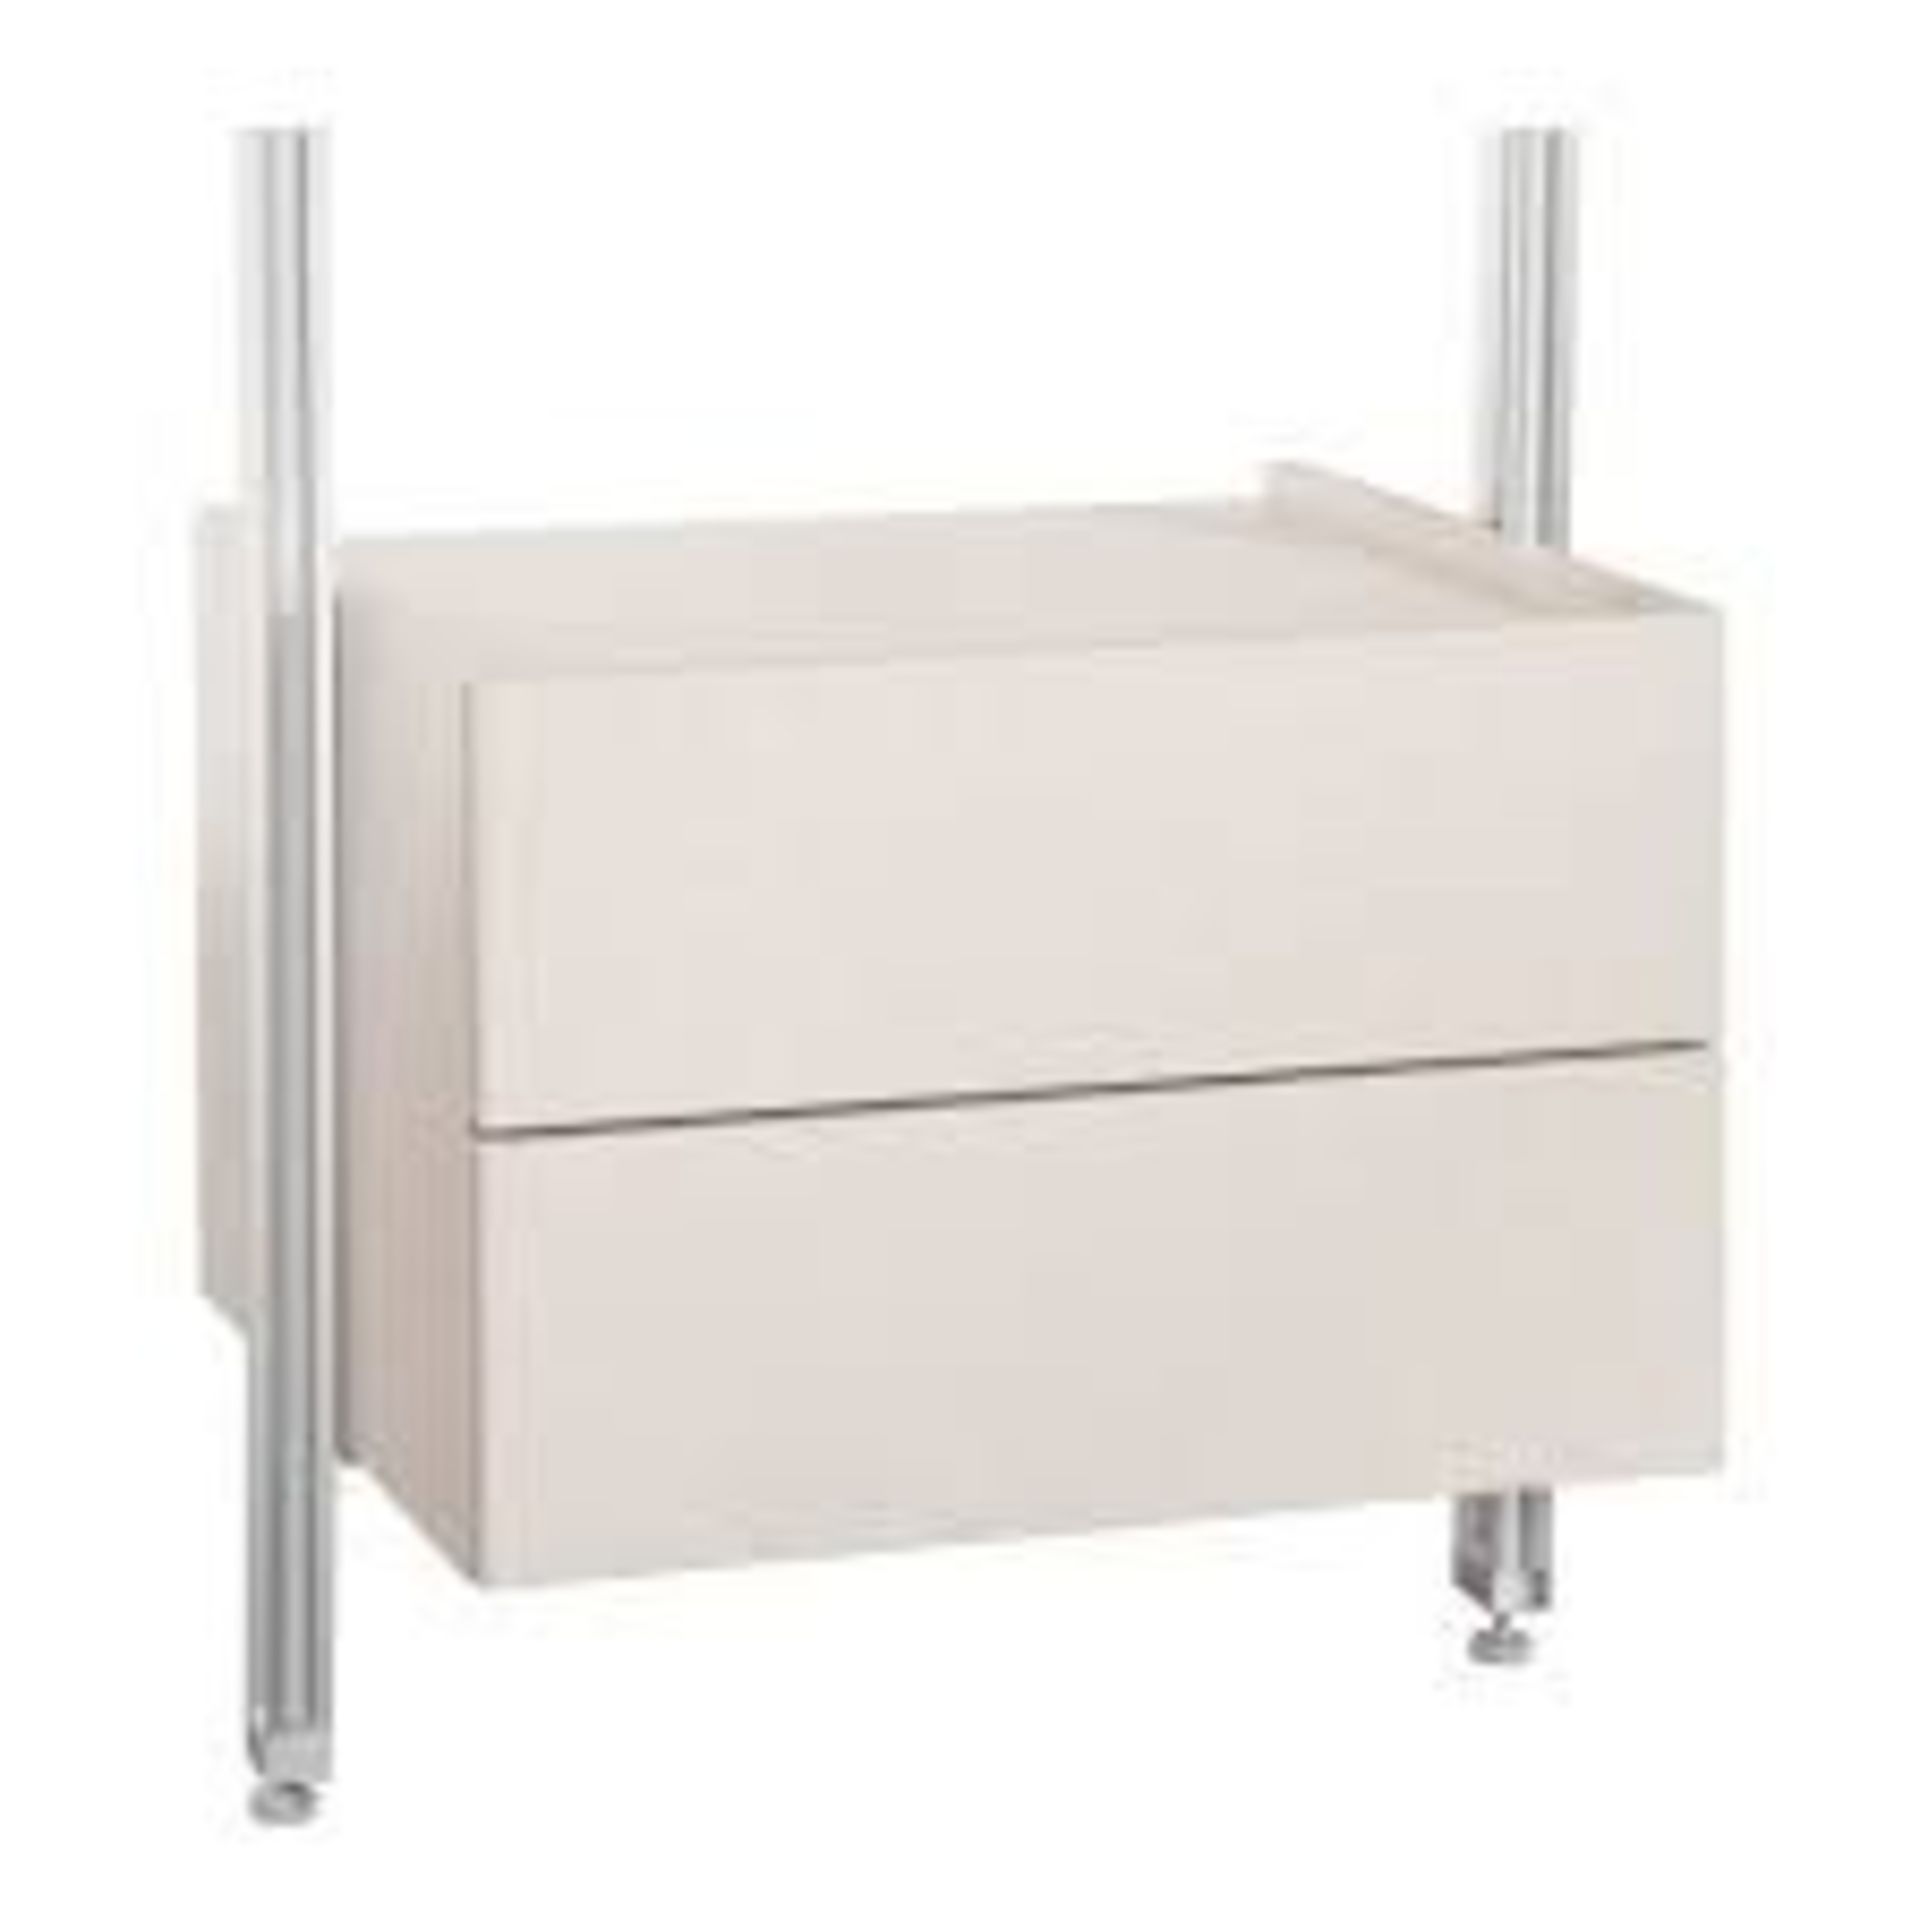 Boxed Ispace Relax Linen Drawer Box RRP £160 (18313) (Pictures are for illustration purposes